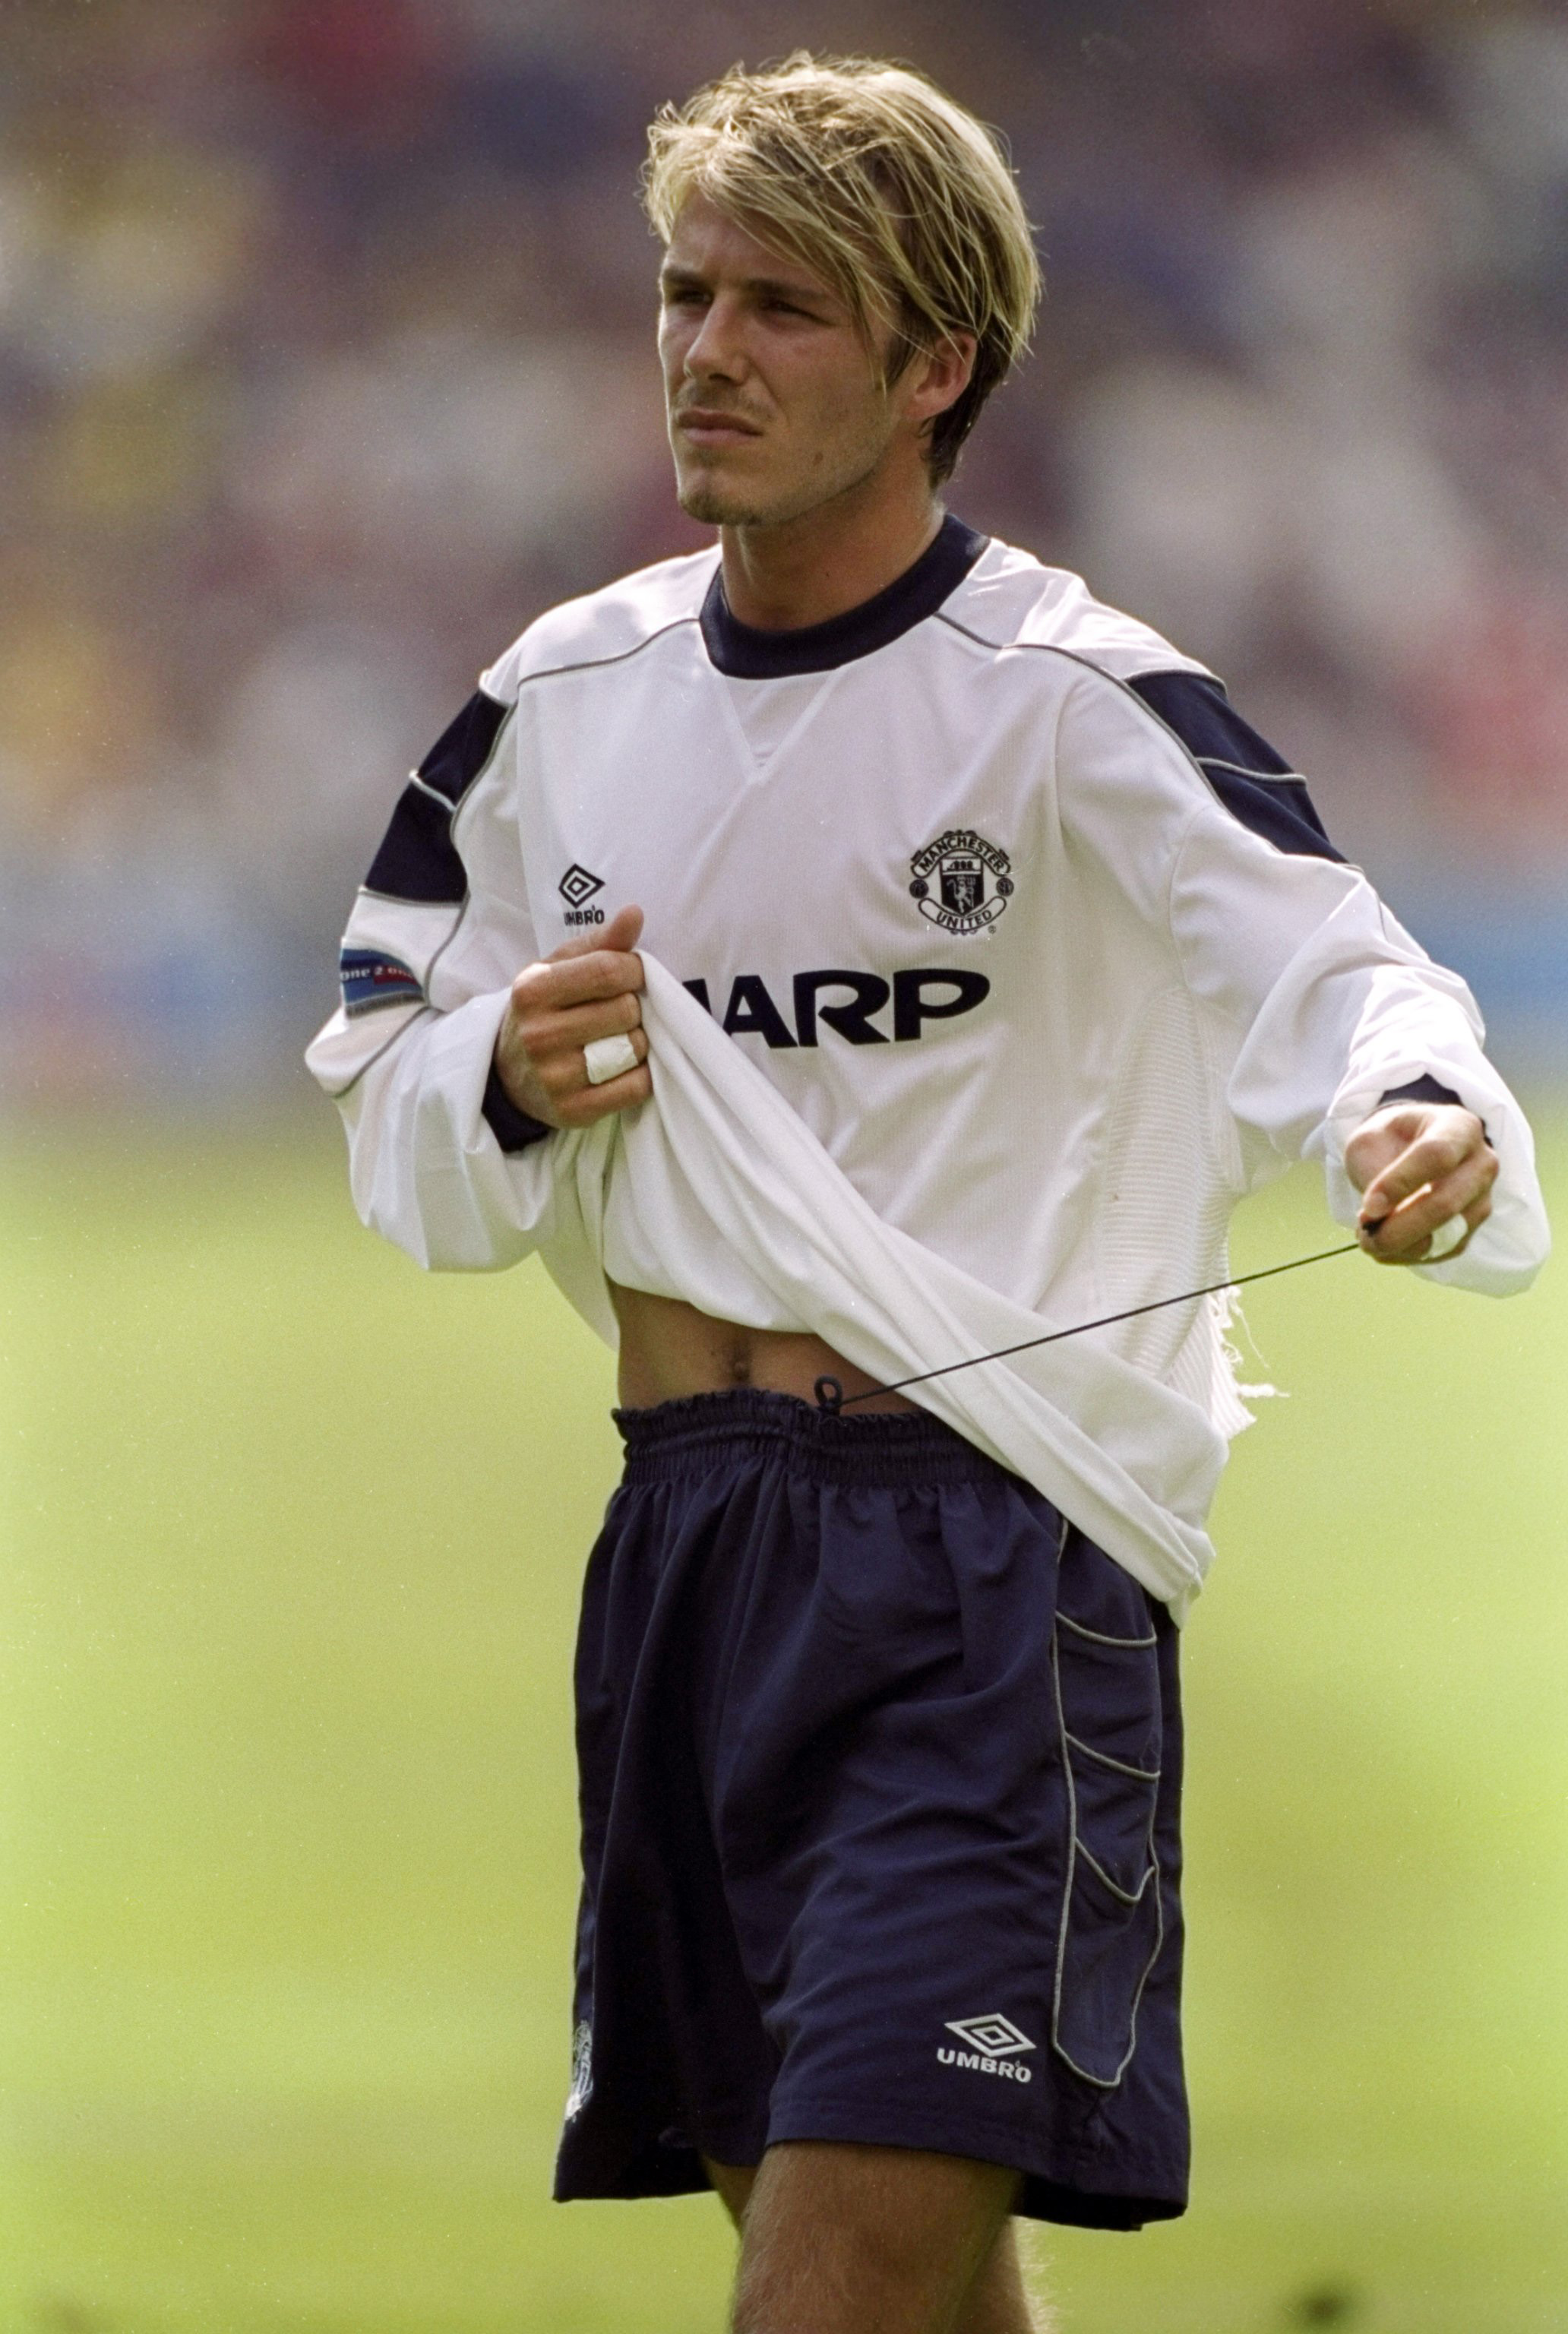 David Beckham plays for Manchester United against Arsenal in the FA Charity Shield at Wembley Stadium on August 1, 1999.